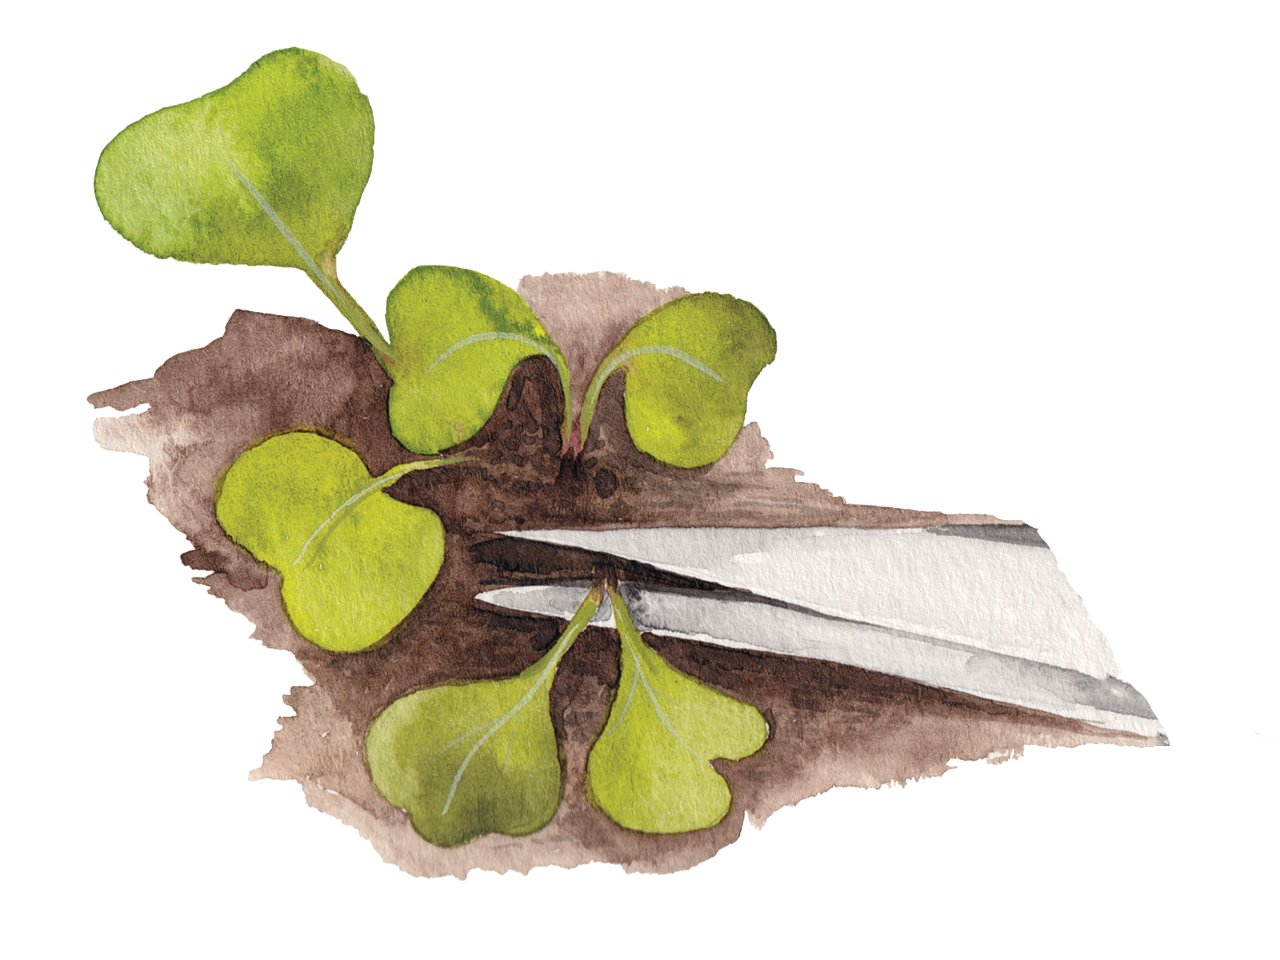 An illustration of a seedling being cut at the soil line against a white background.